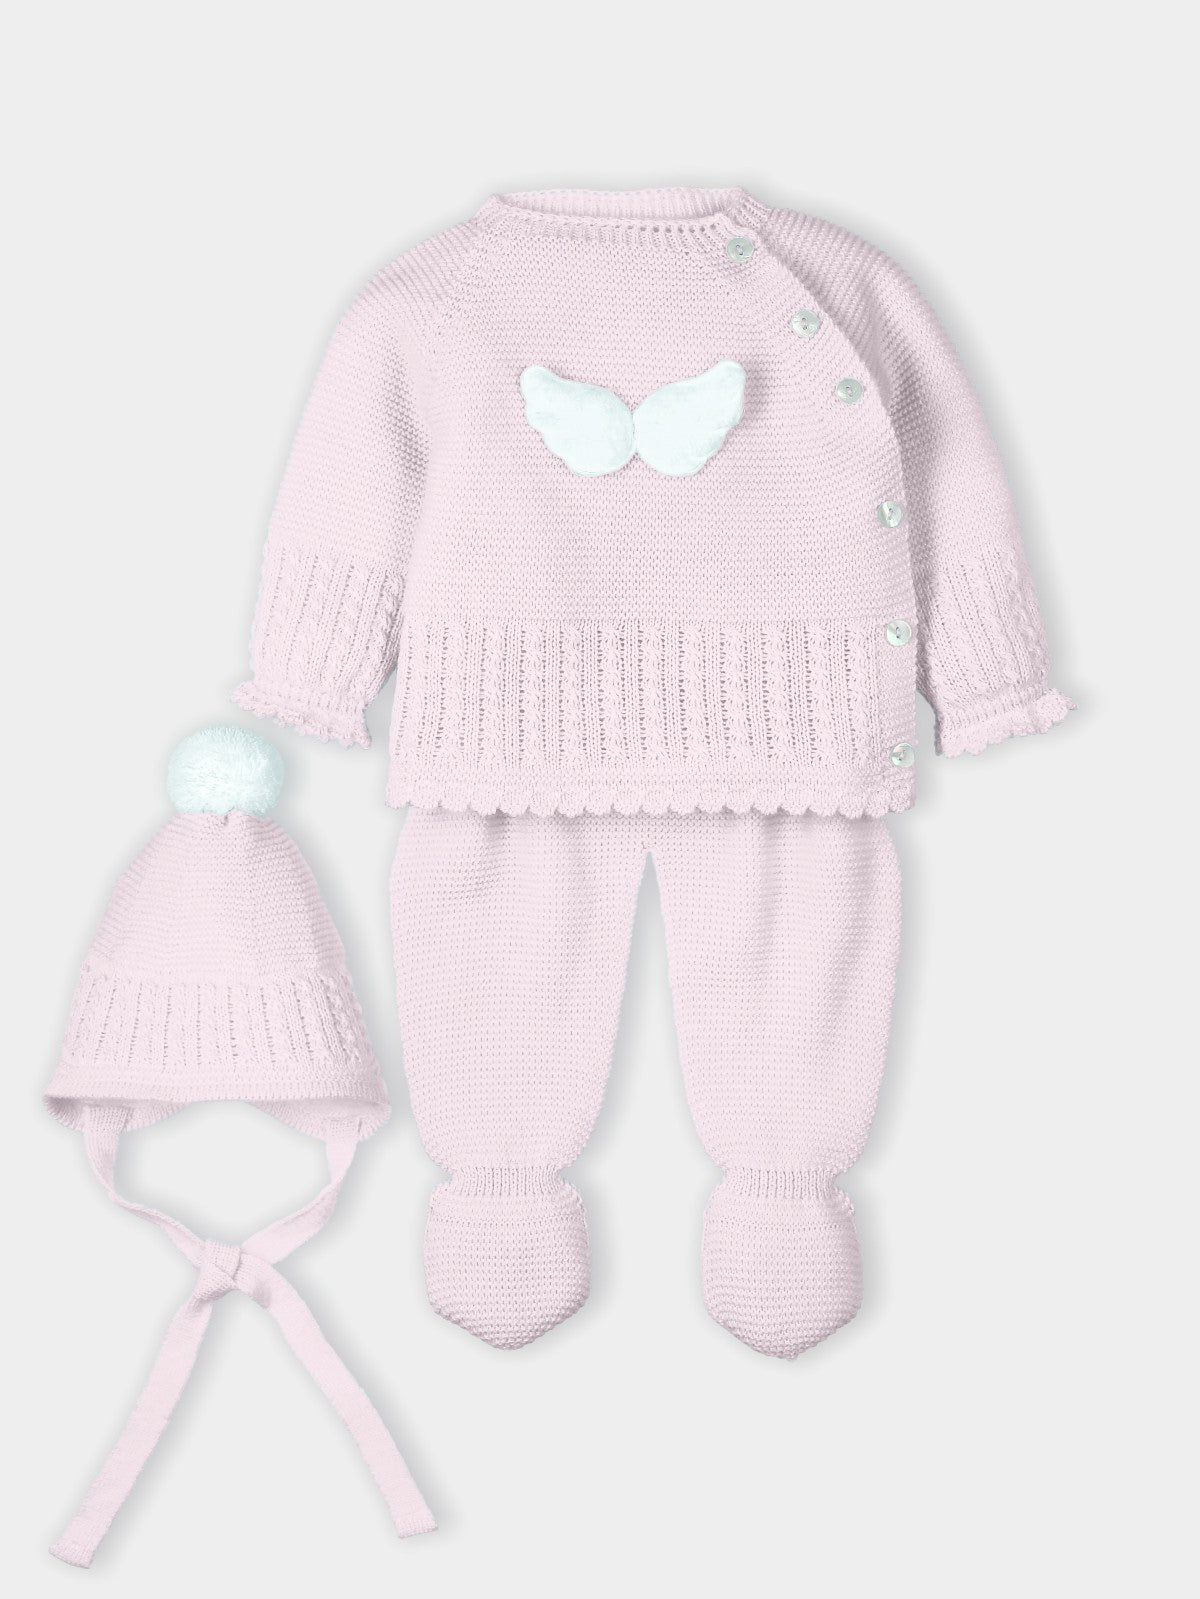 AW23 Mac Ilusion Pale Pink Angel Wing Knitted 3-Piece Set